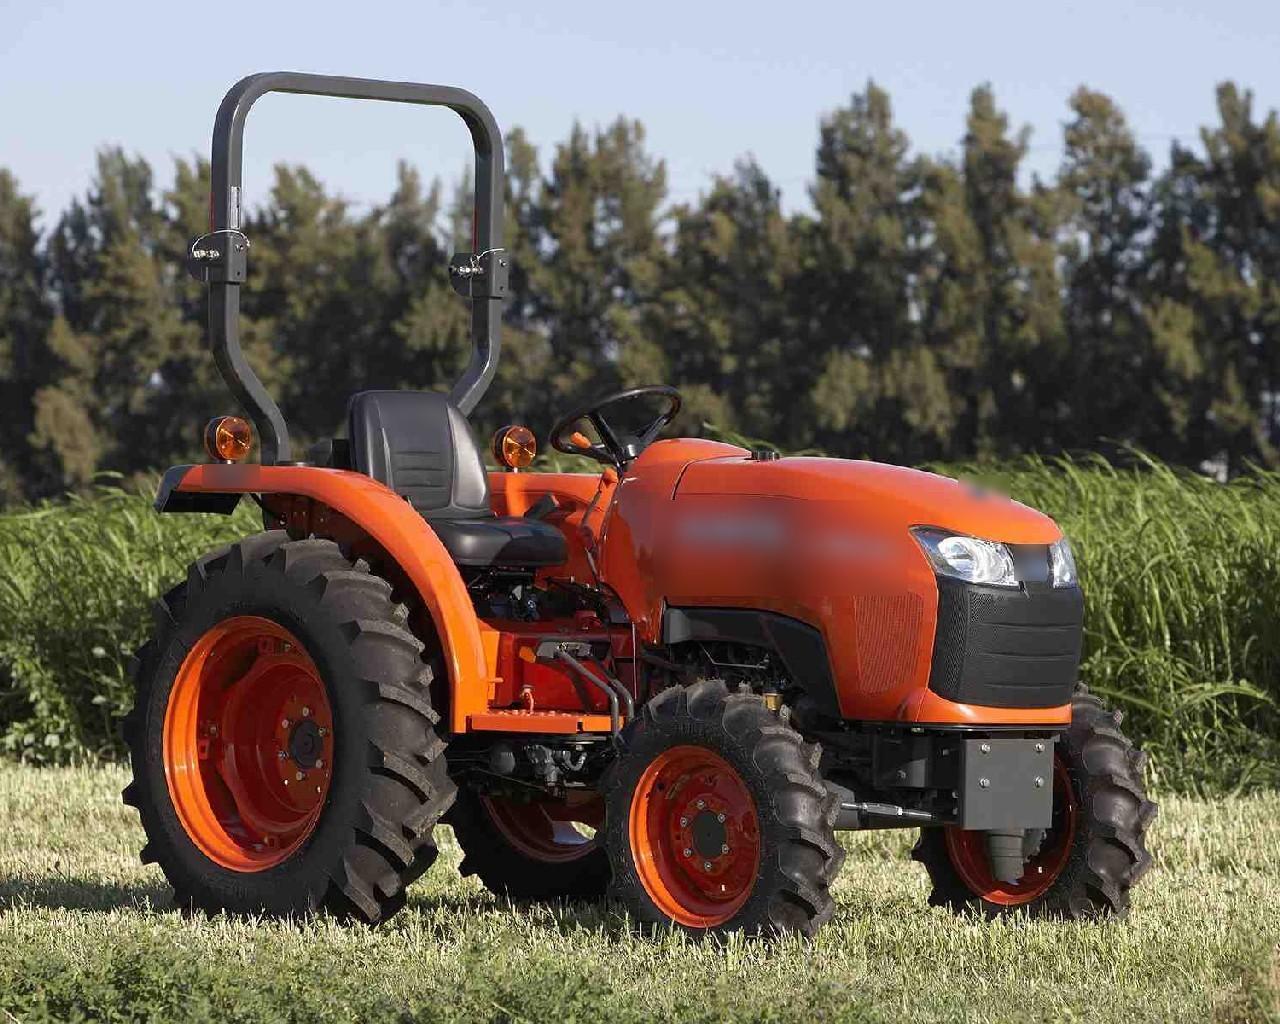 Wallpaper Kubota Tractor for Android